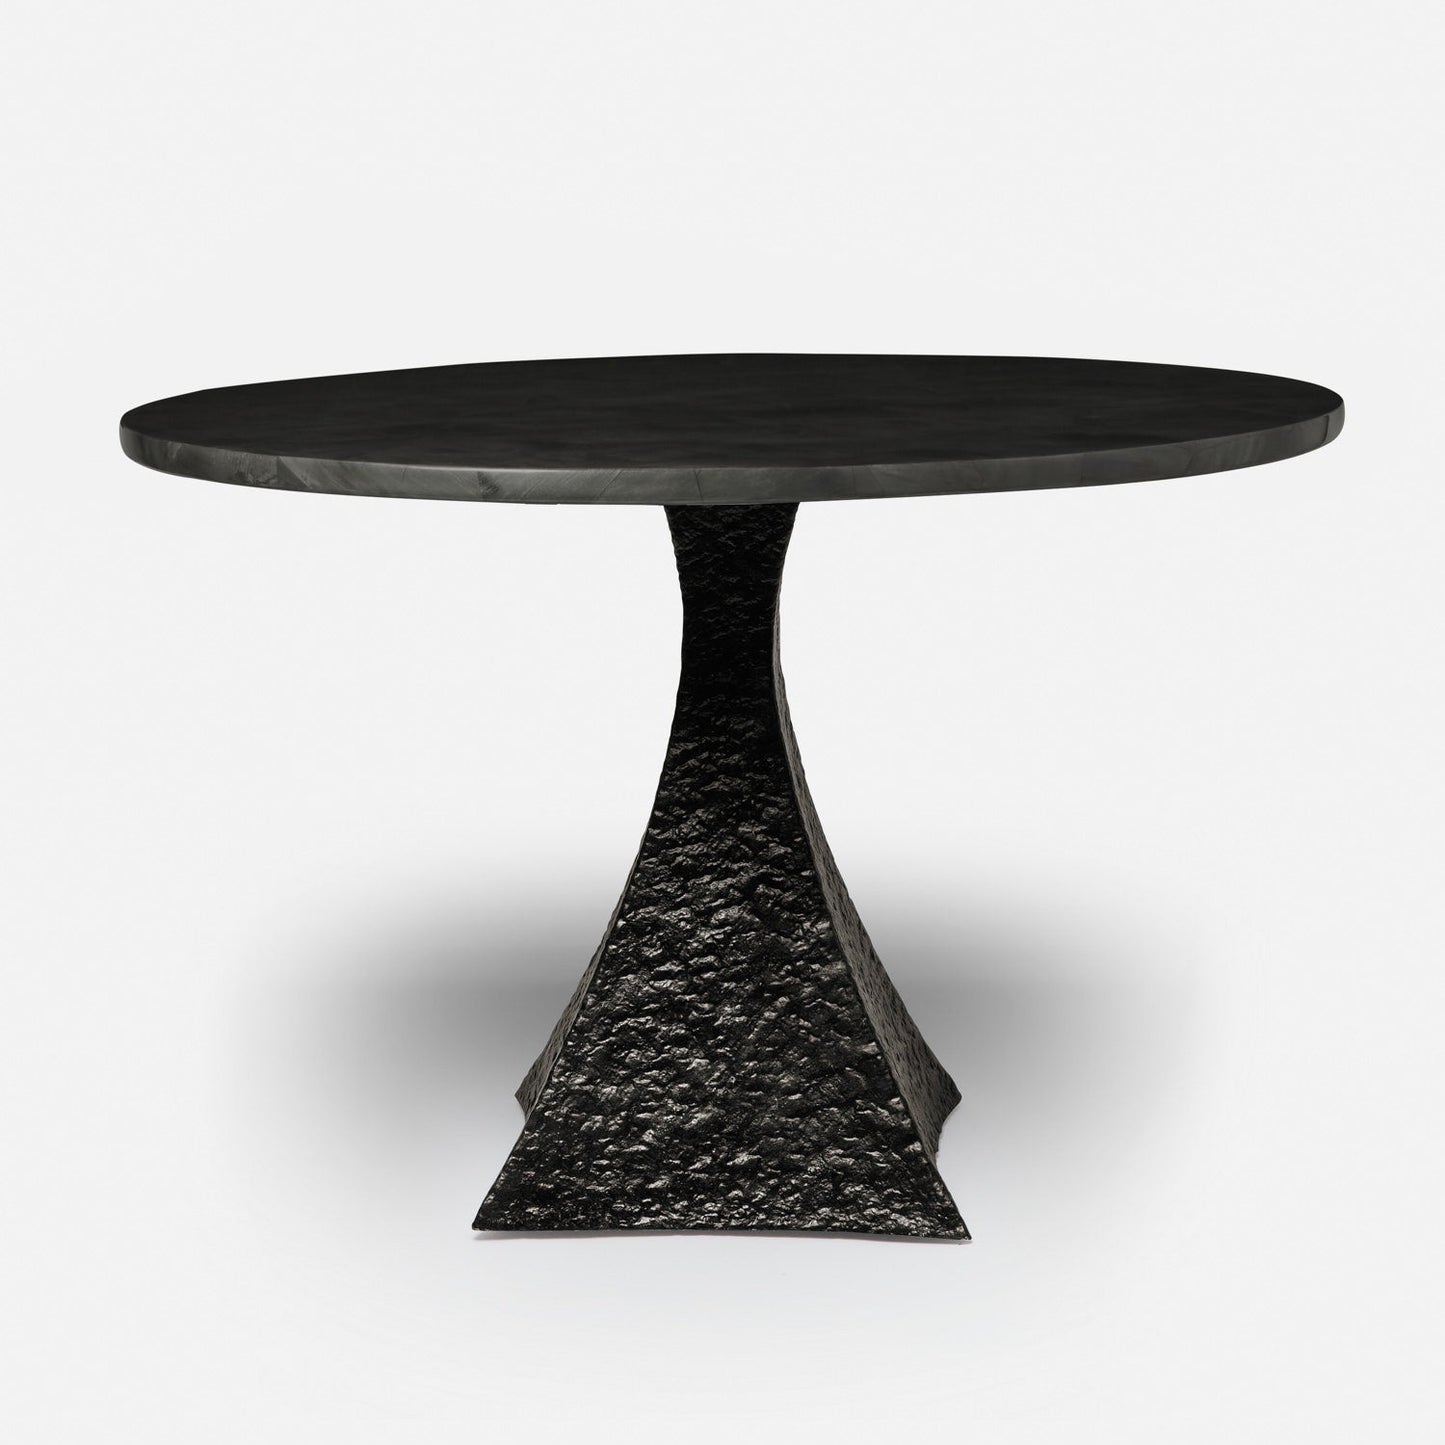 Made Goods Noor 60" x 30" Bumpy Black Iron Dinning Table With Round Dark Faux Horn Table Top